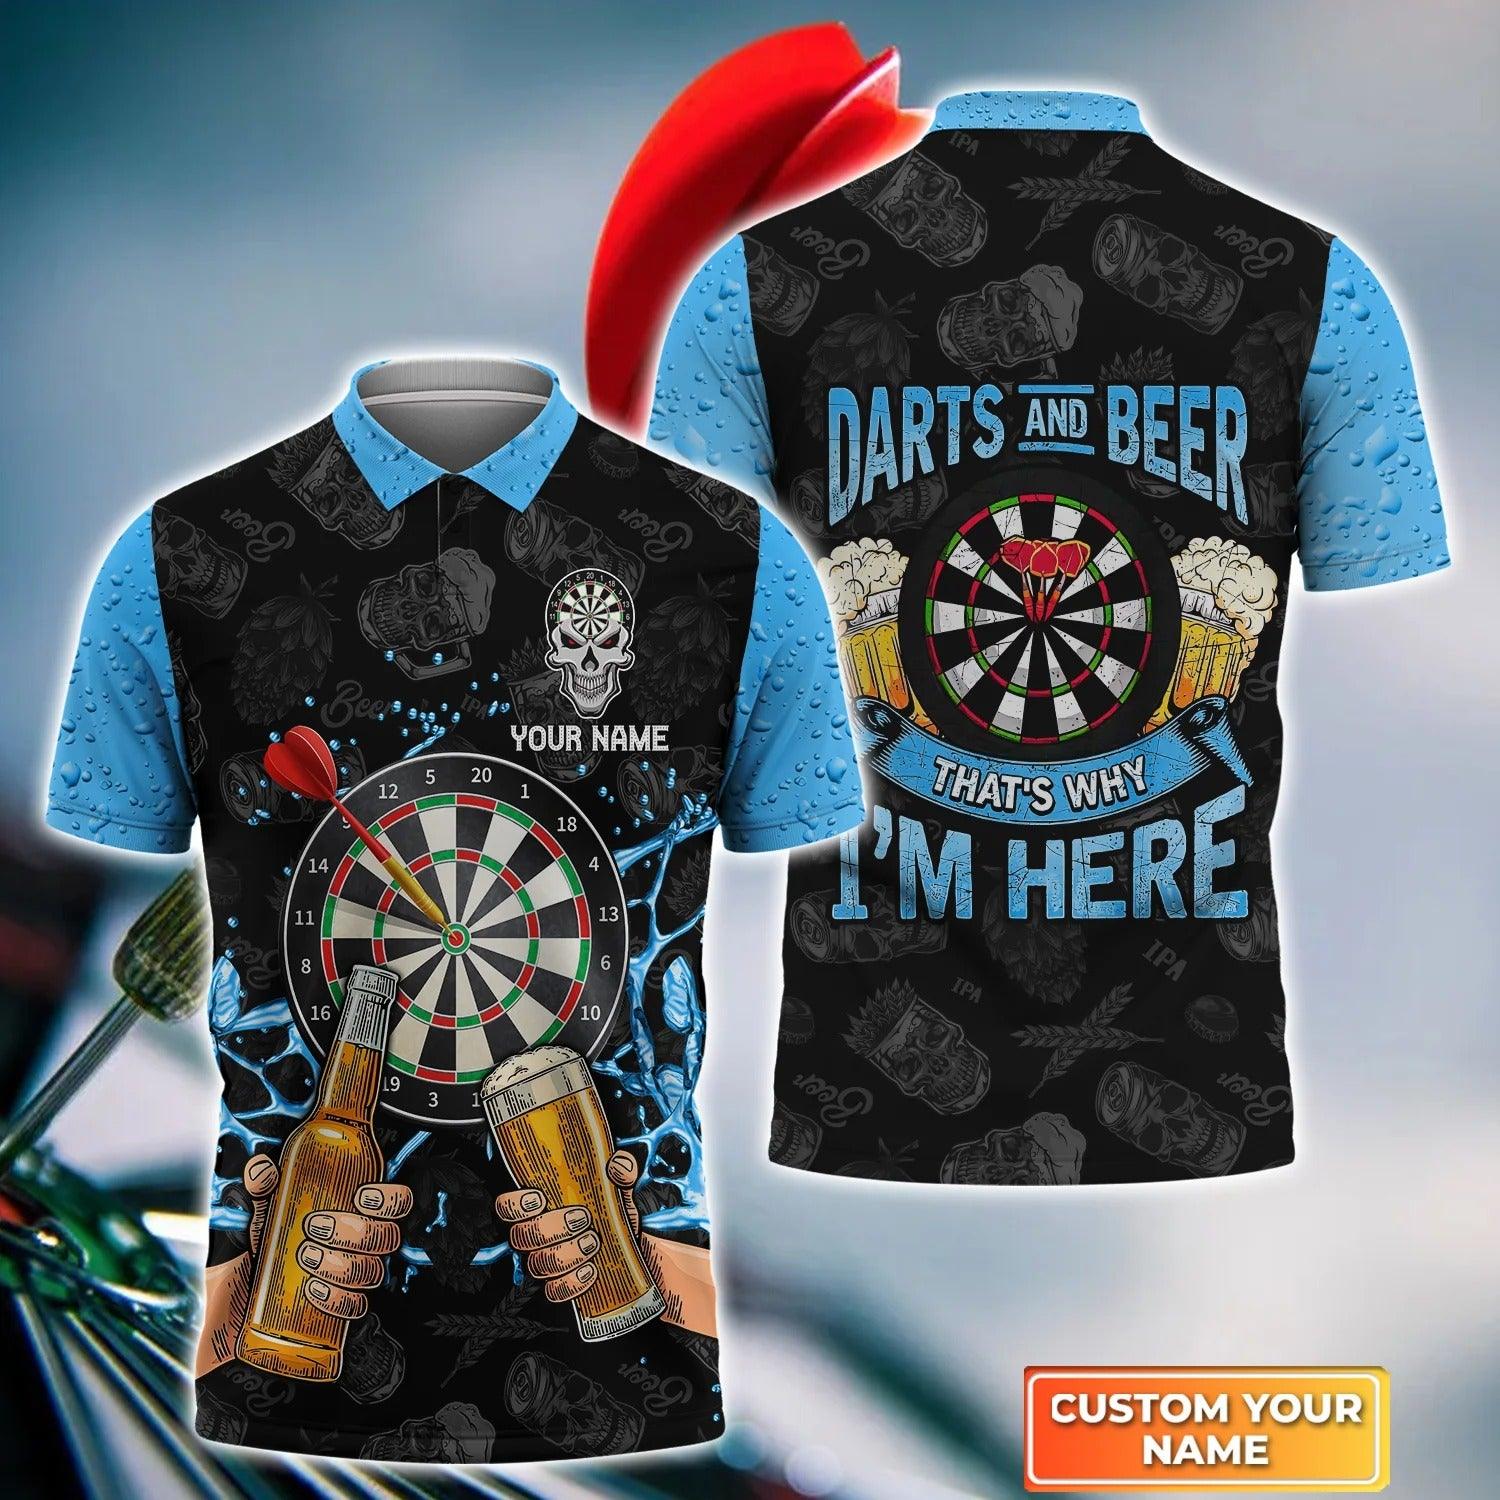 Personalised Darts Polo Shirts, Darts And Beer That's Why I'm Here Skull Background Custom Name Men Polo Shirts - Perfect Gift For Men, Darts Player - Amzanimalsgift